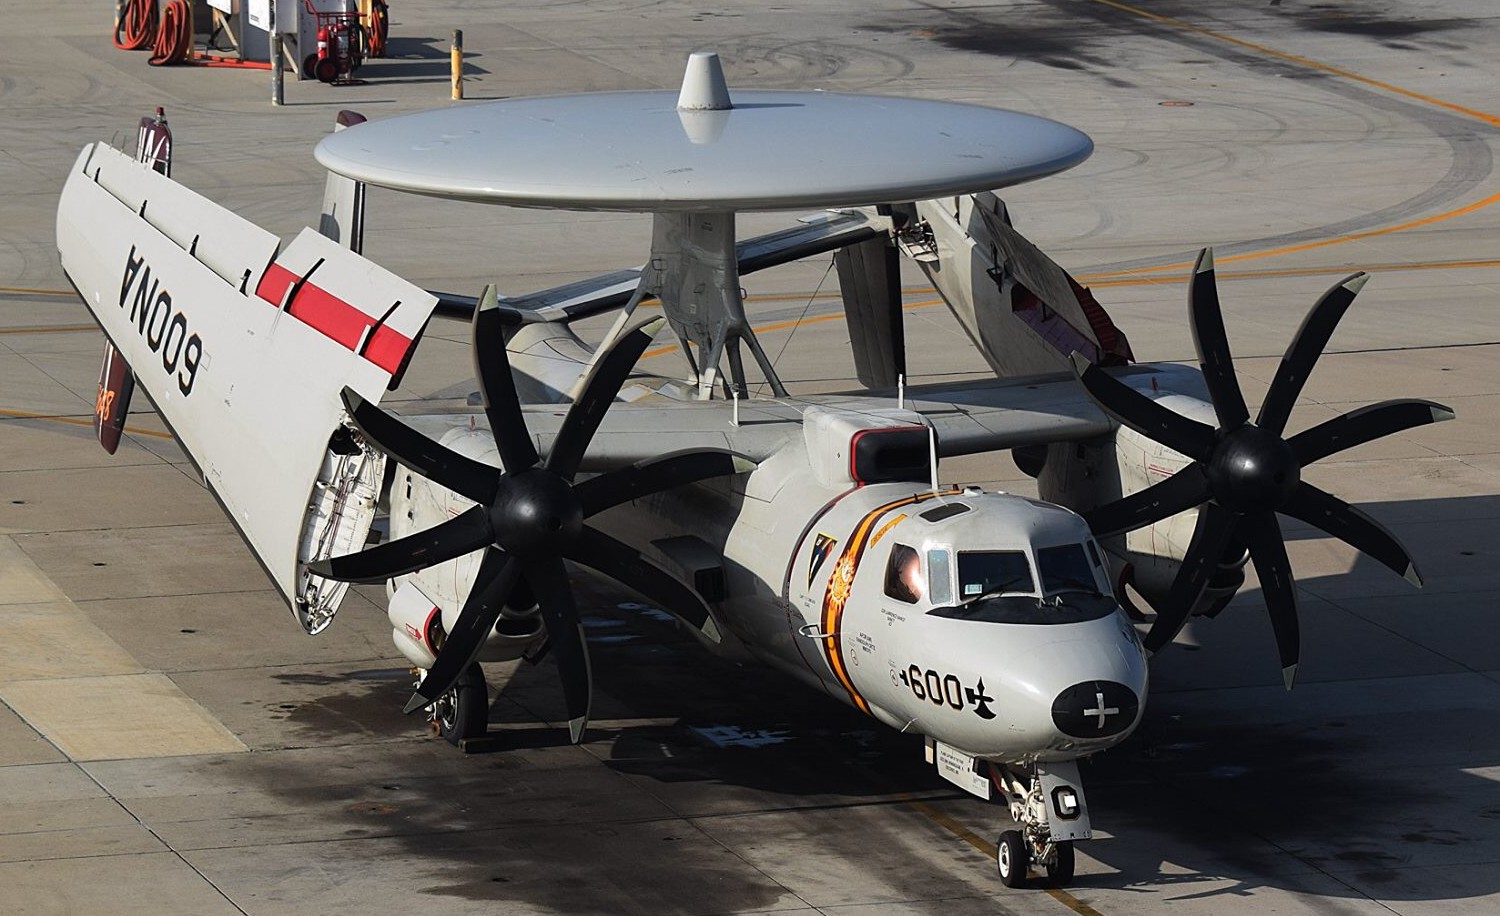 vaw-116 sun kings airborne command control squadron carrier early warning cvw-17 naval base ventura county point mugu 82